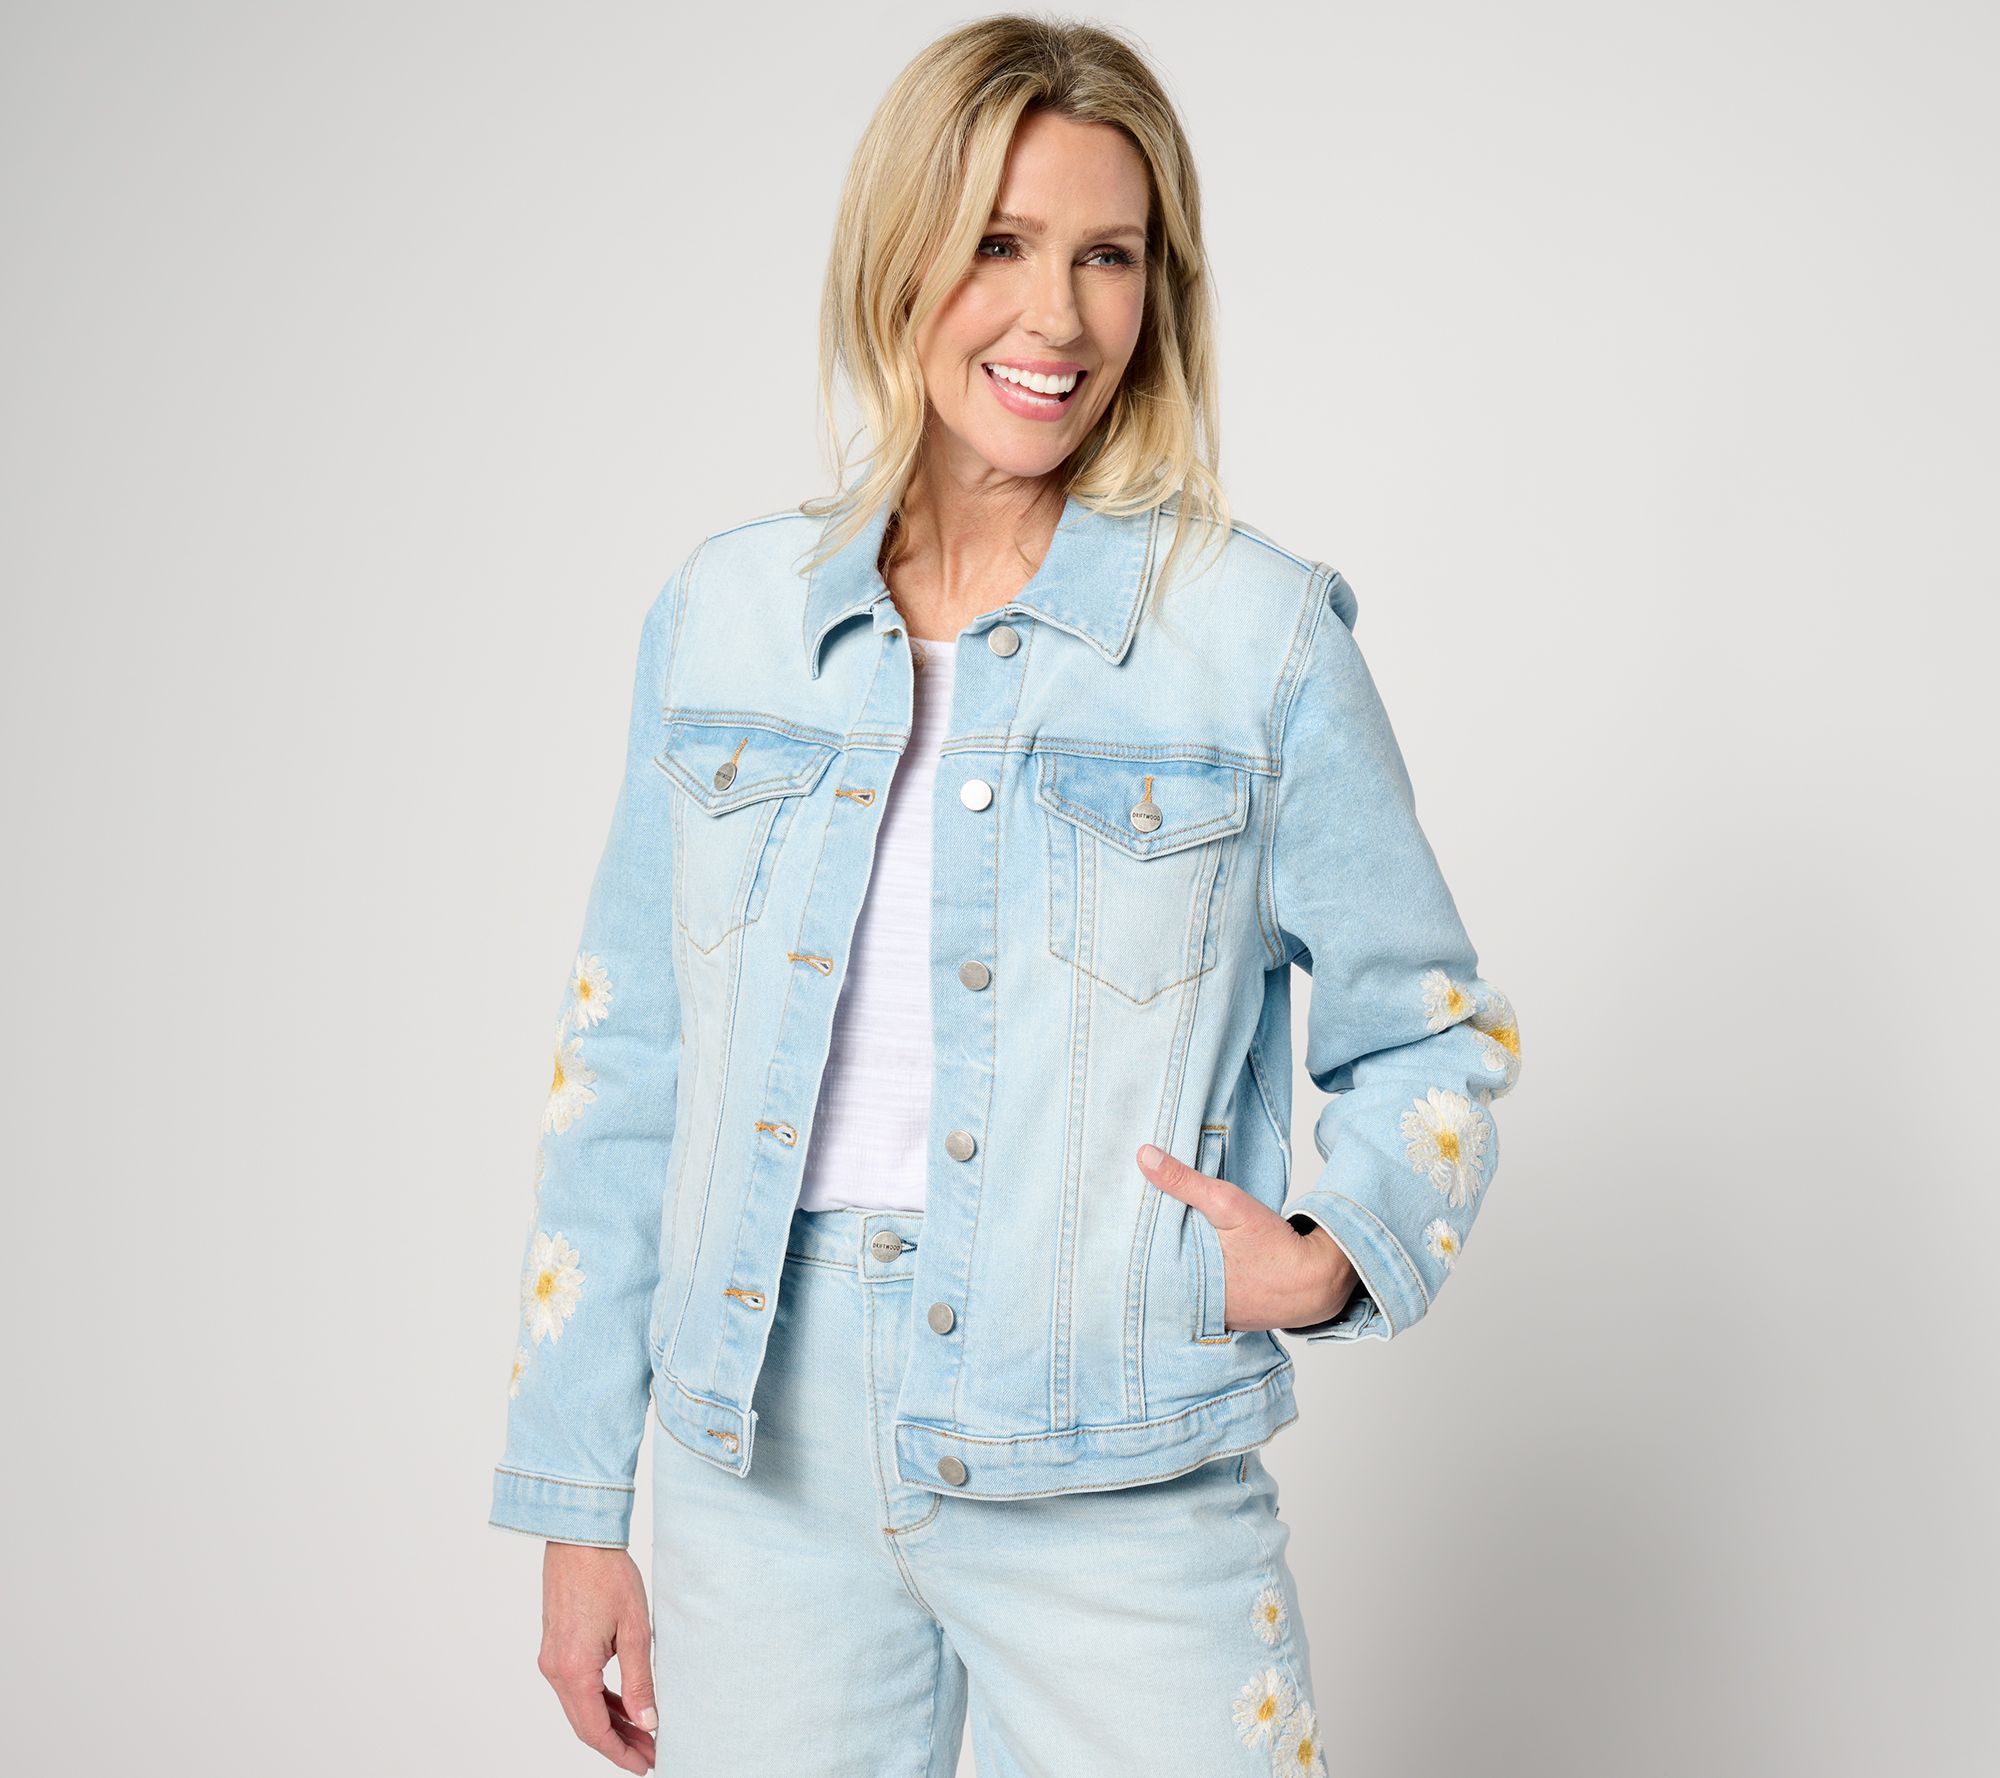 Driftwood Jeans Classic Embroidered Denim Jacket - Daisy 